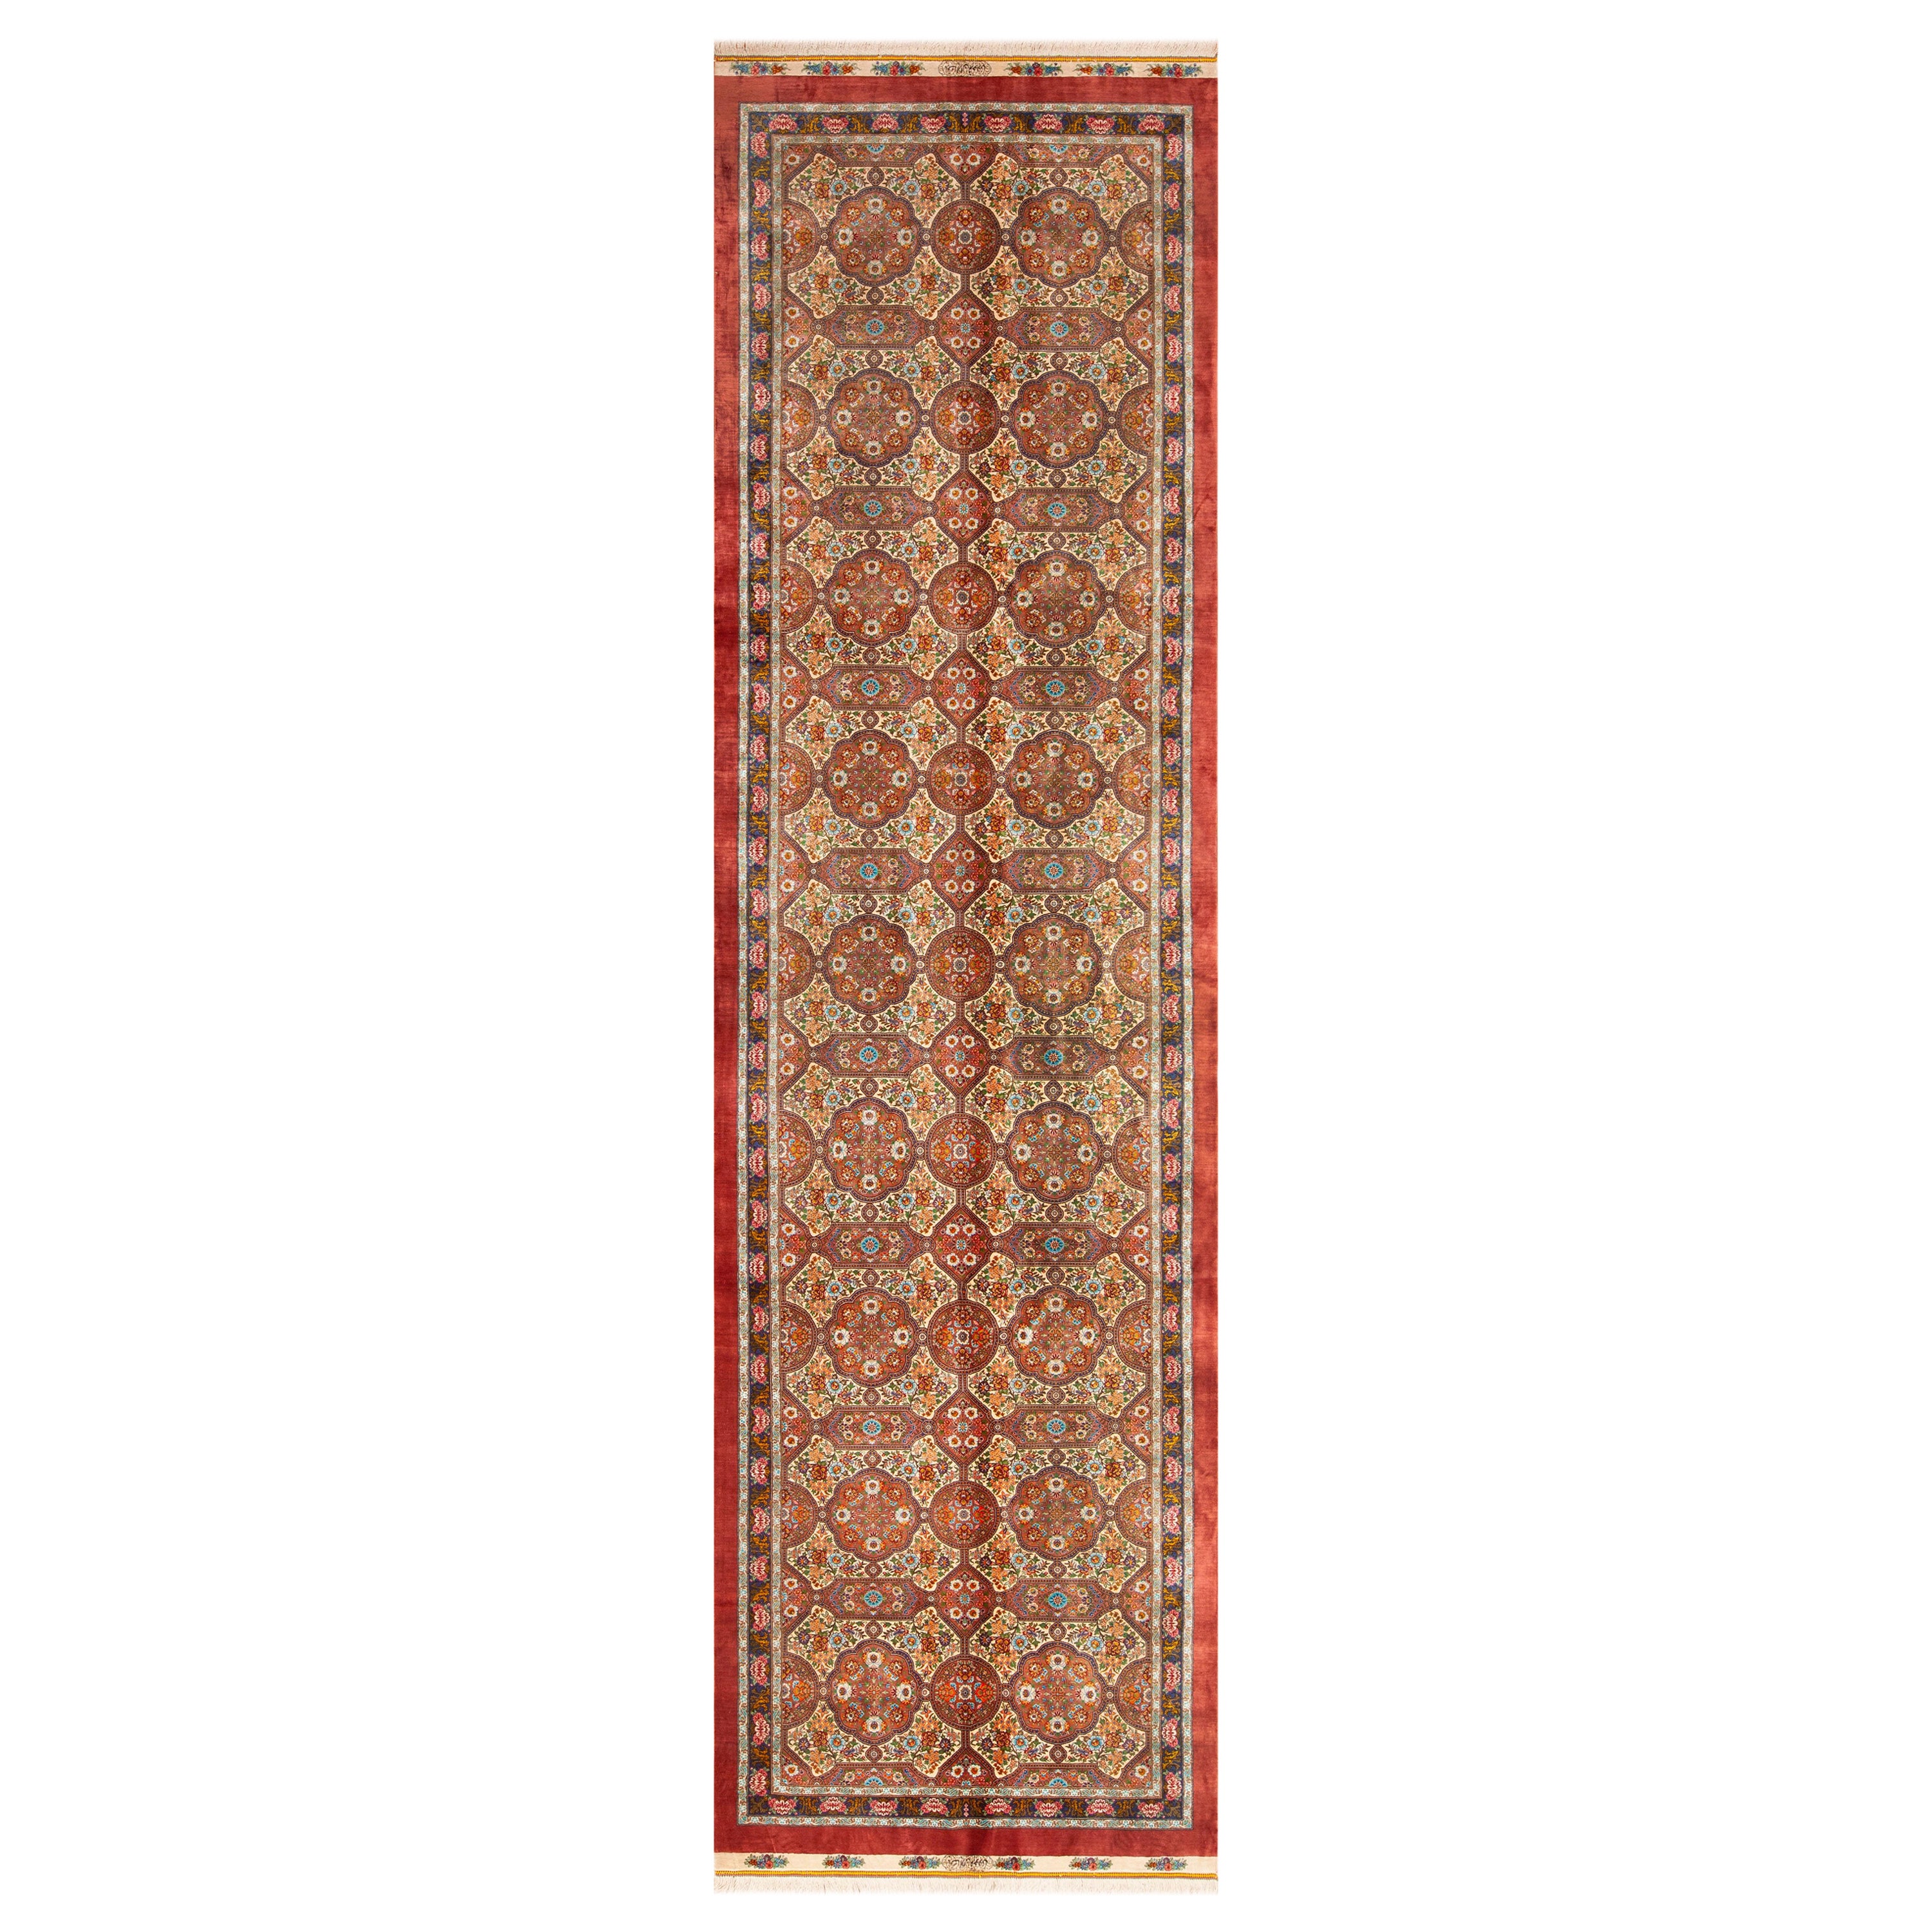 Magnificent Intricate Floral Vintage Persian Silk Qum Runner Rug 3'7" x 12'9" For Sale